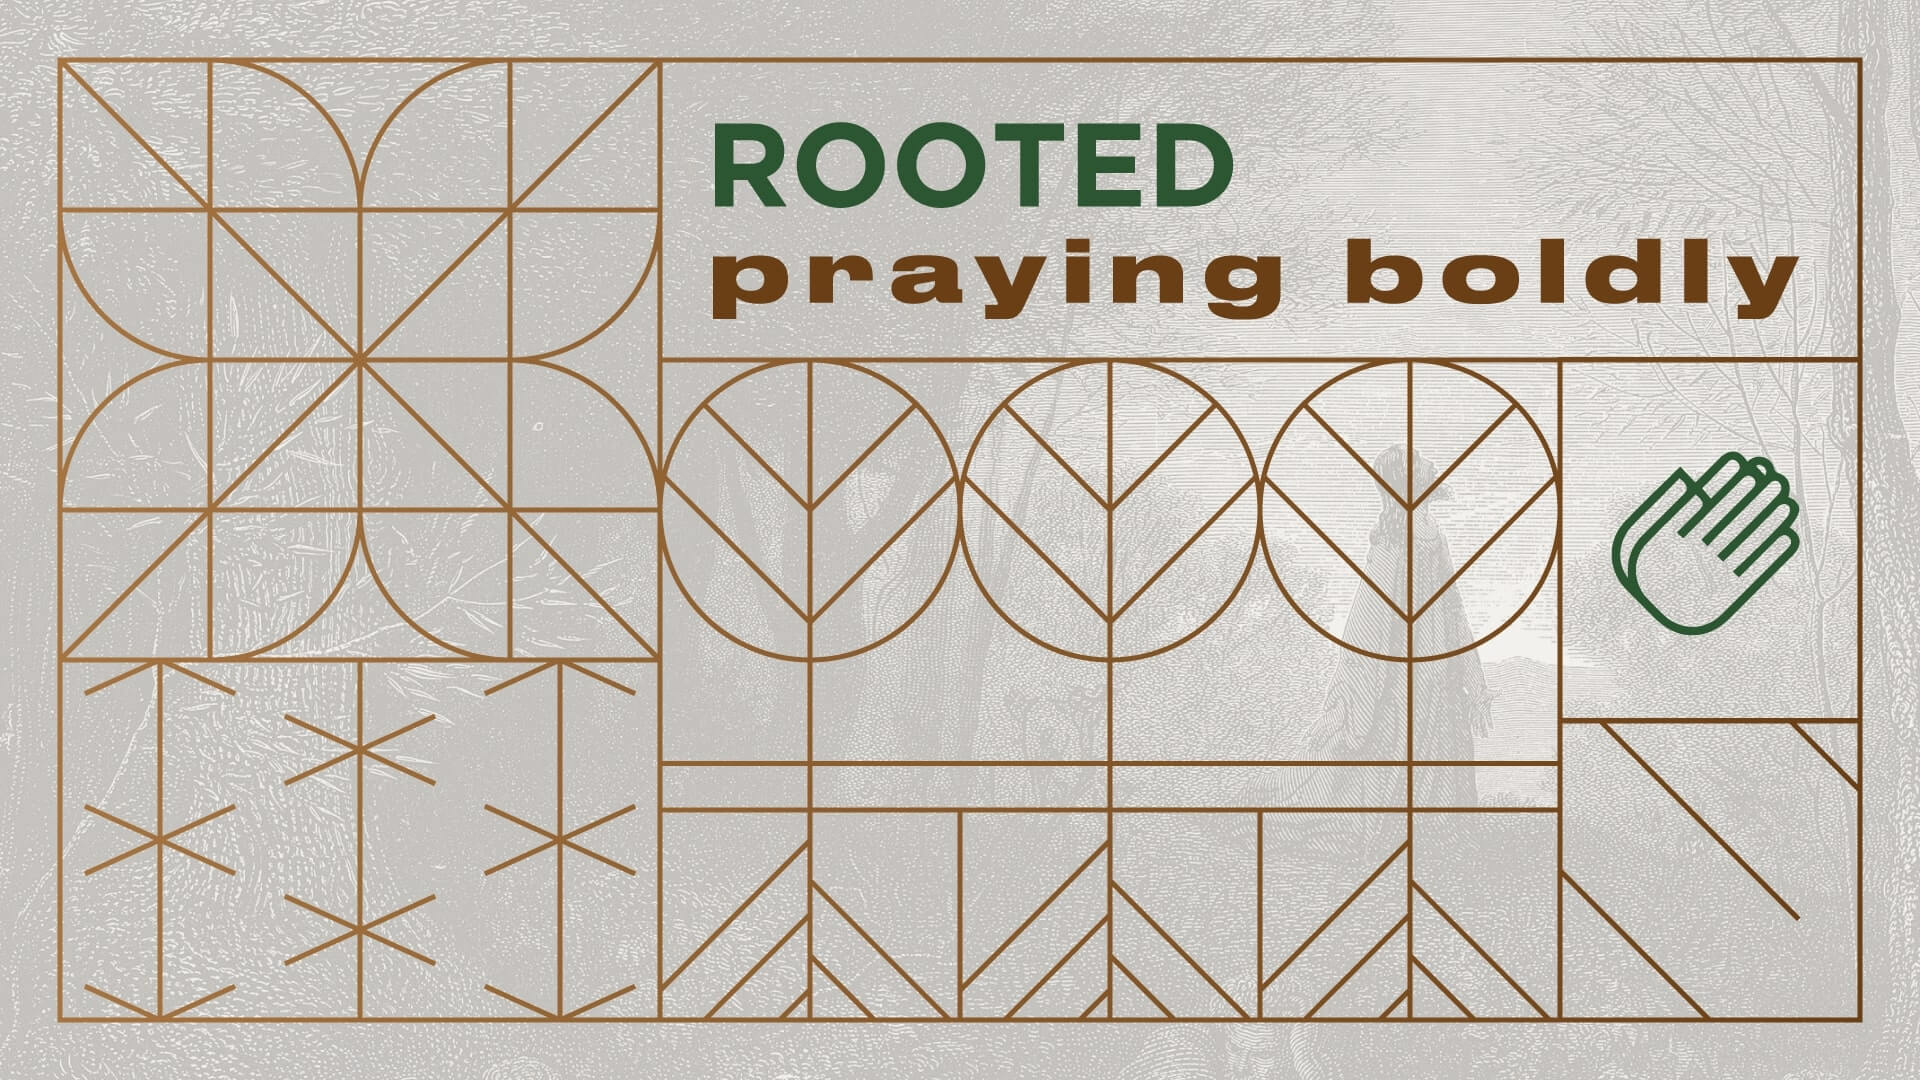 9:30 – Rooted – Bold Devotion